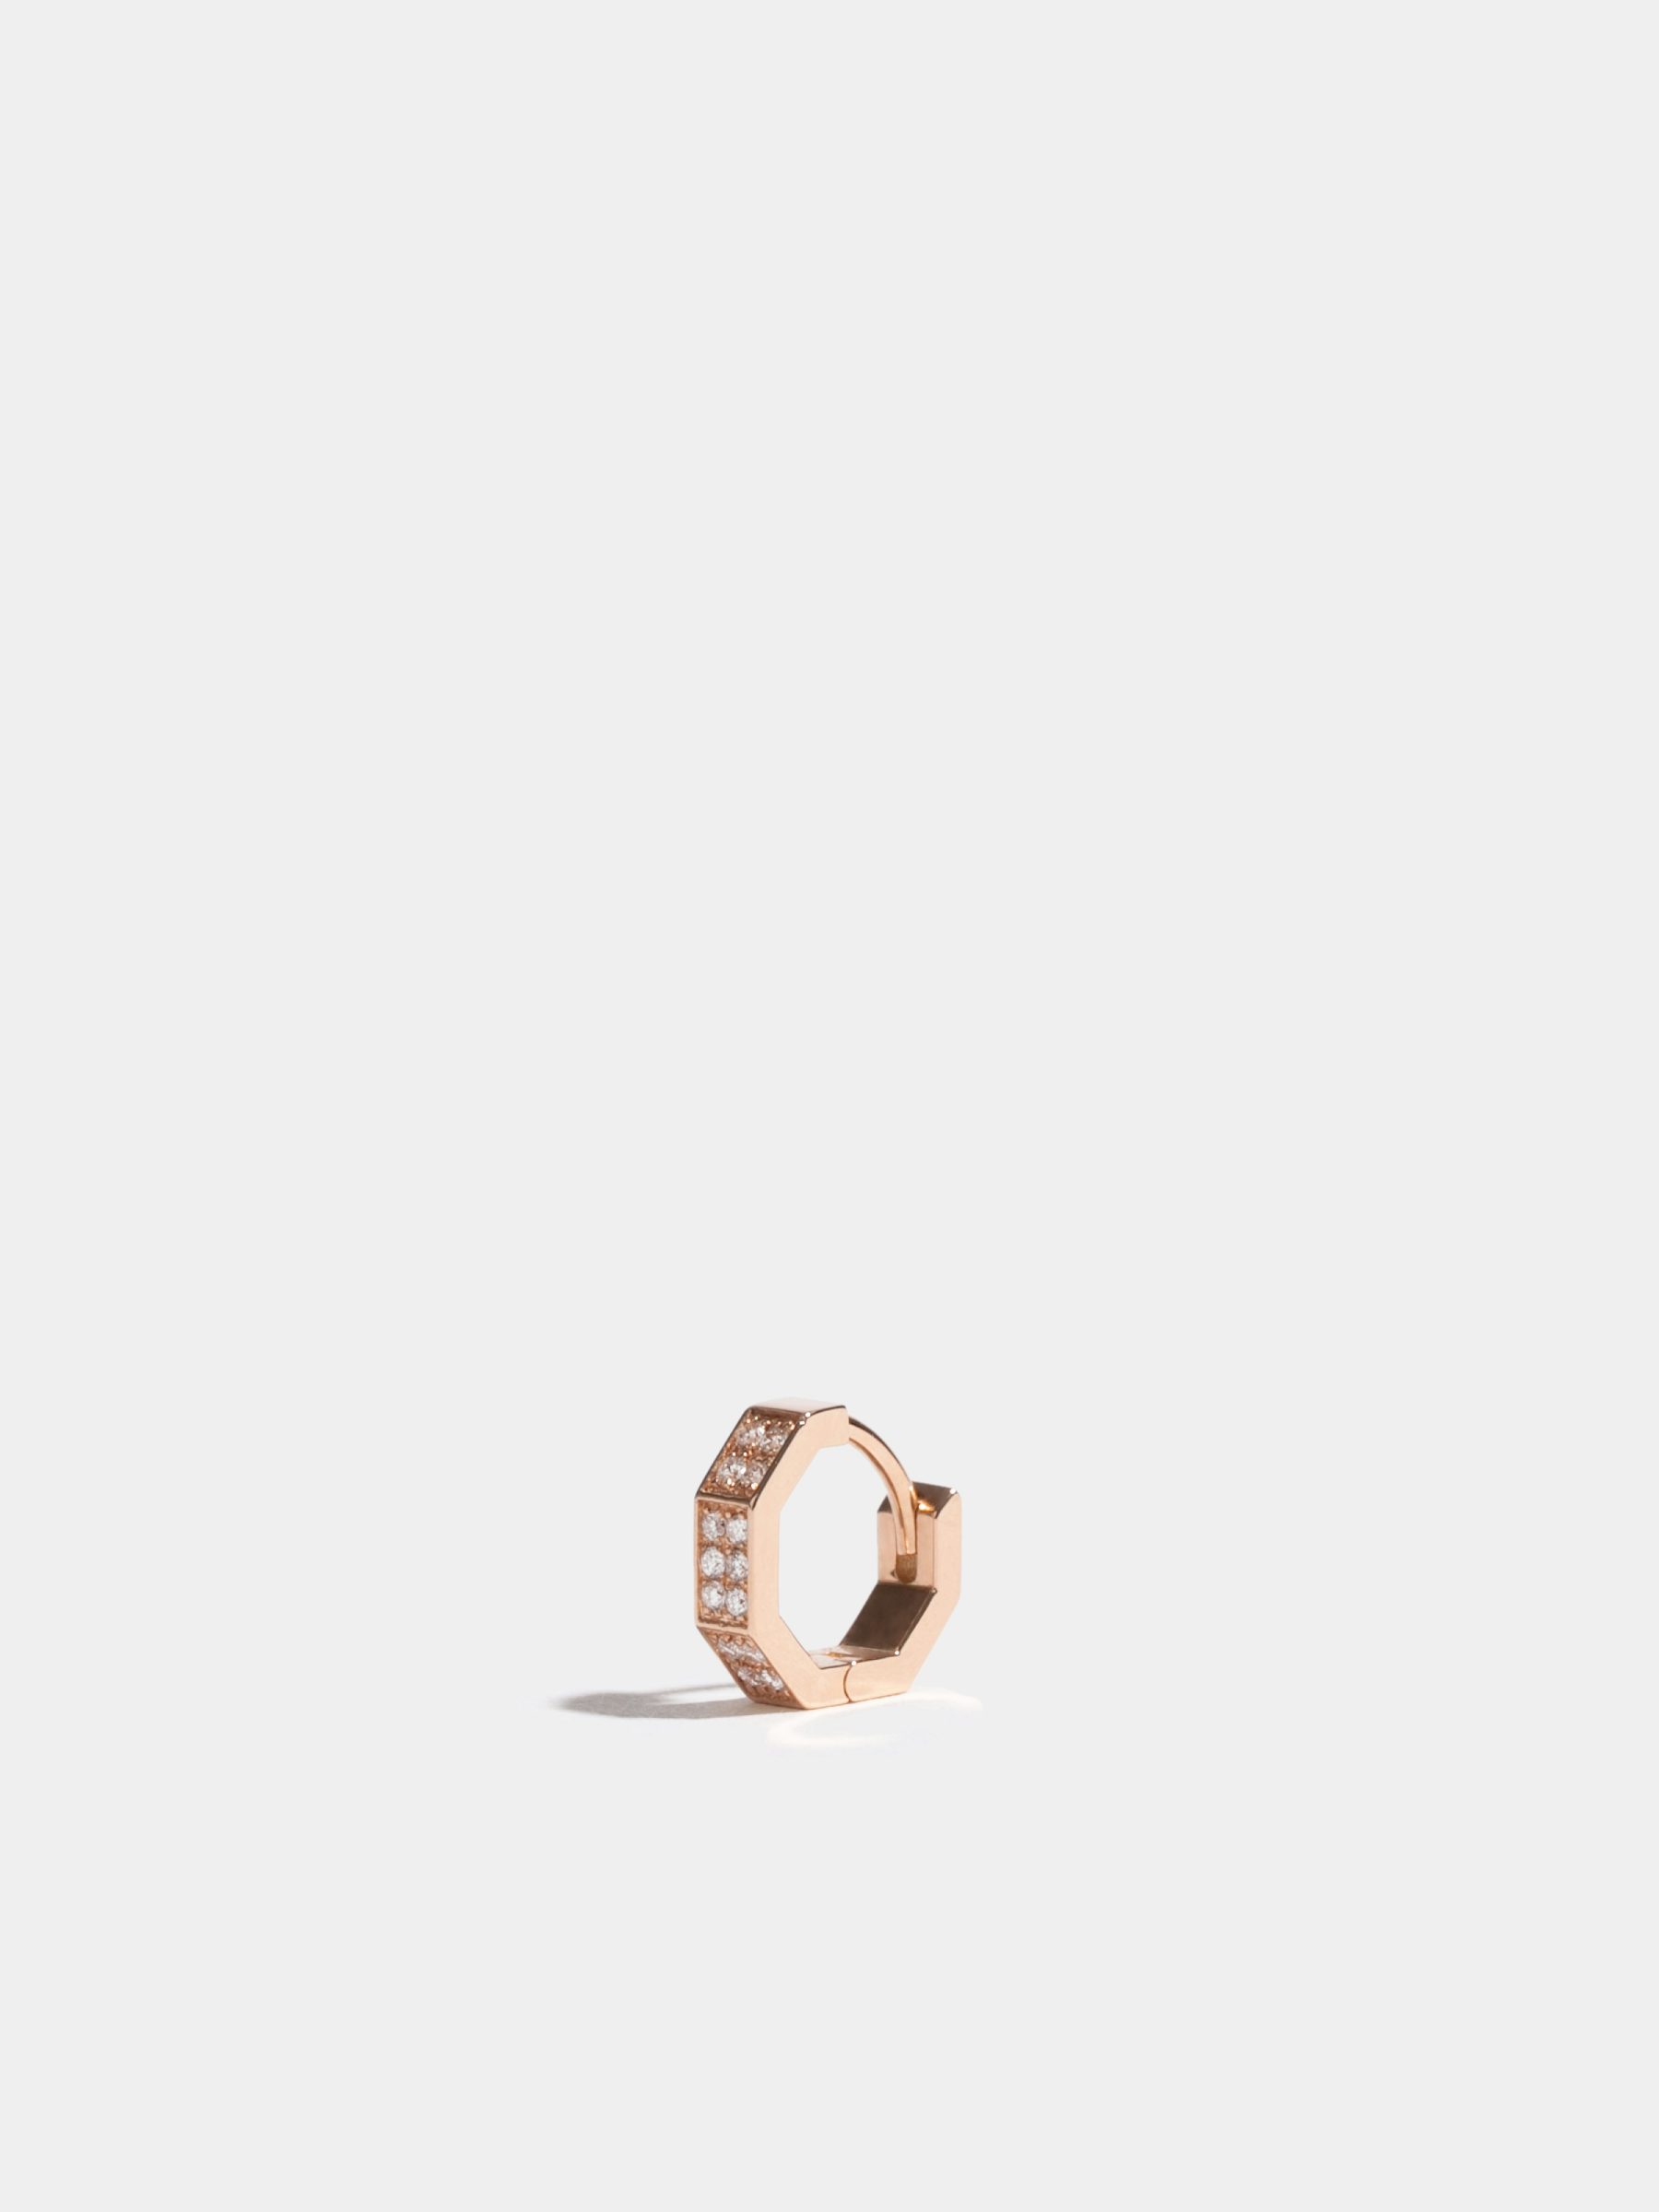 Octogone single-loop in 18k Fairmined ethical rose gold, paved with lab-grown diamonds, the unity.